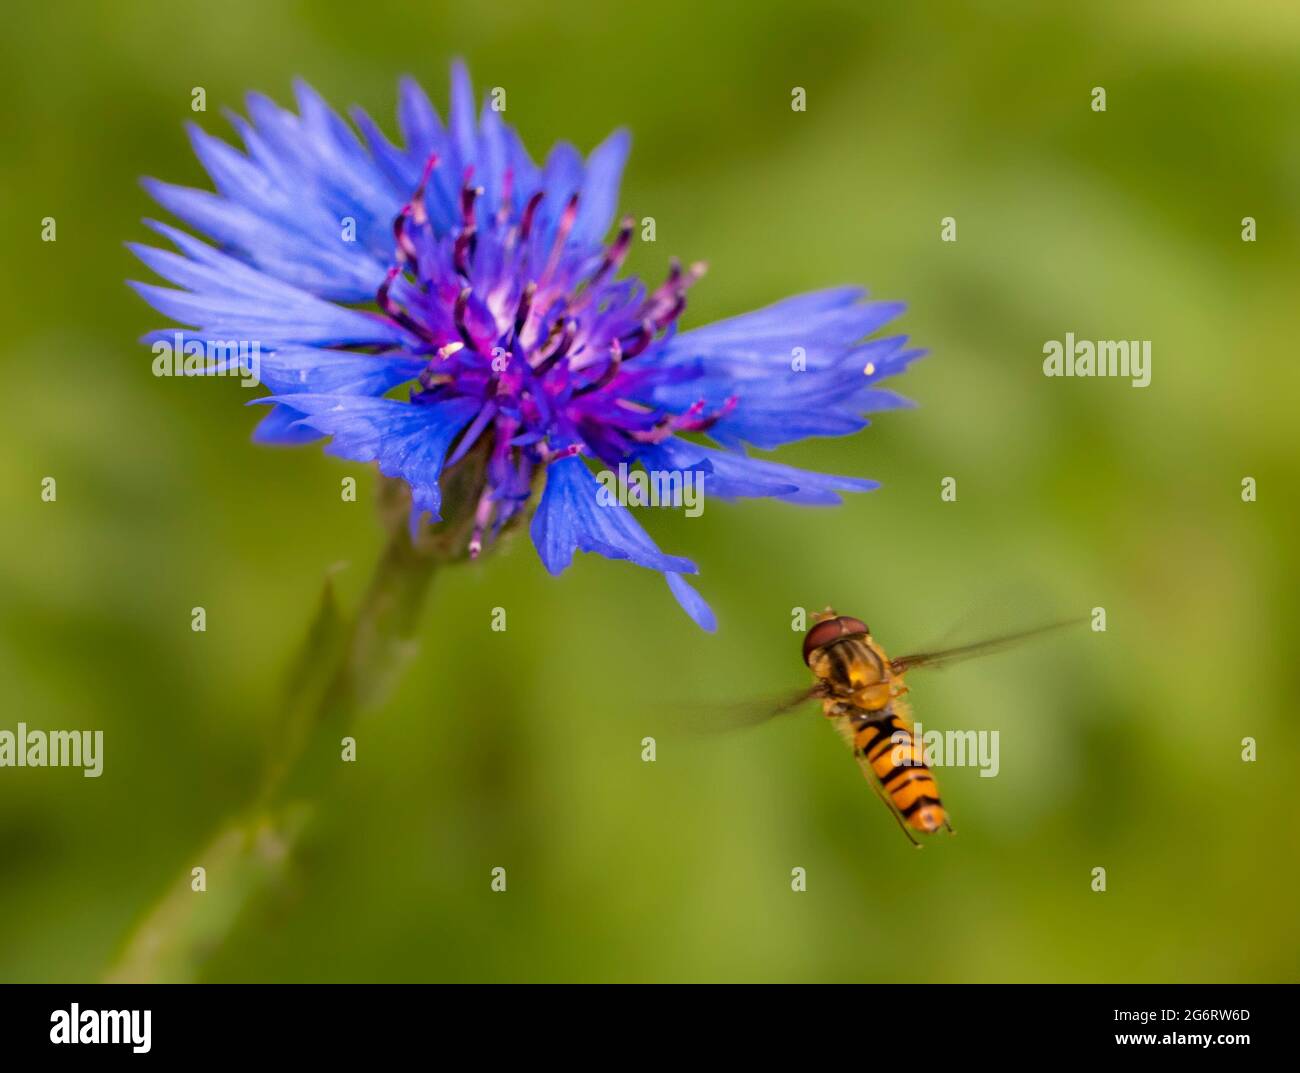 Hoverflies, syrphid flies, Hover Fly, on cornflowers, Bedfordshire, ROYAUME-UNI Banque D'Images